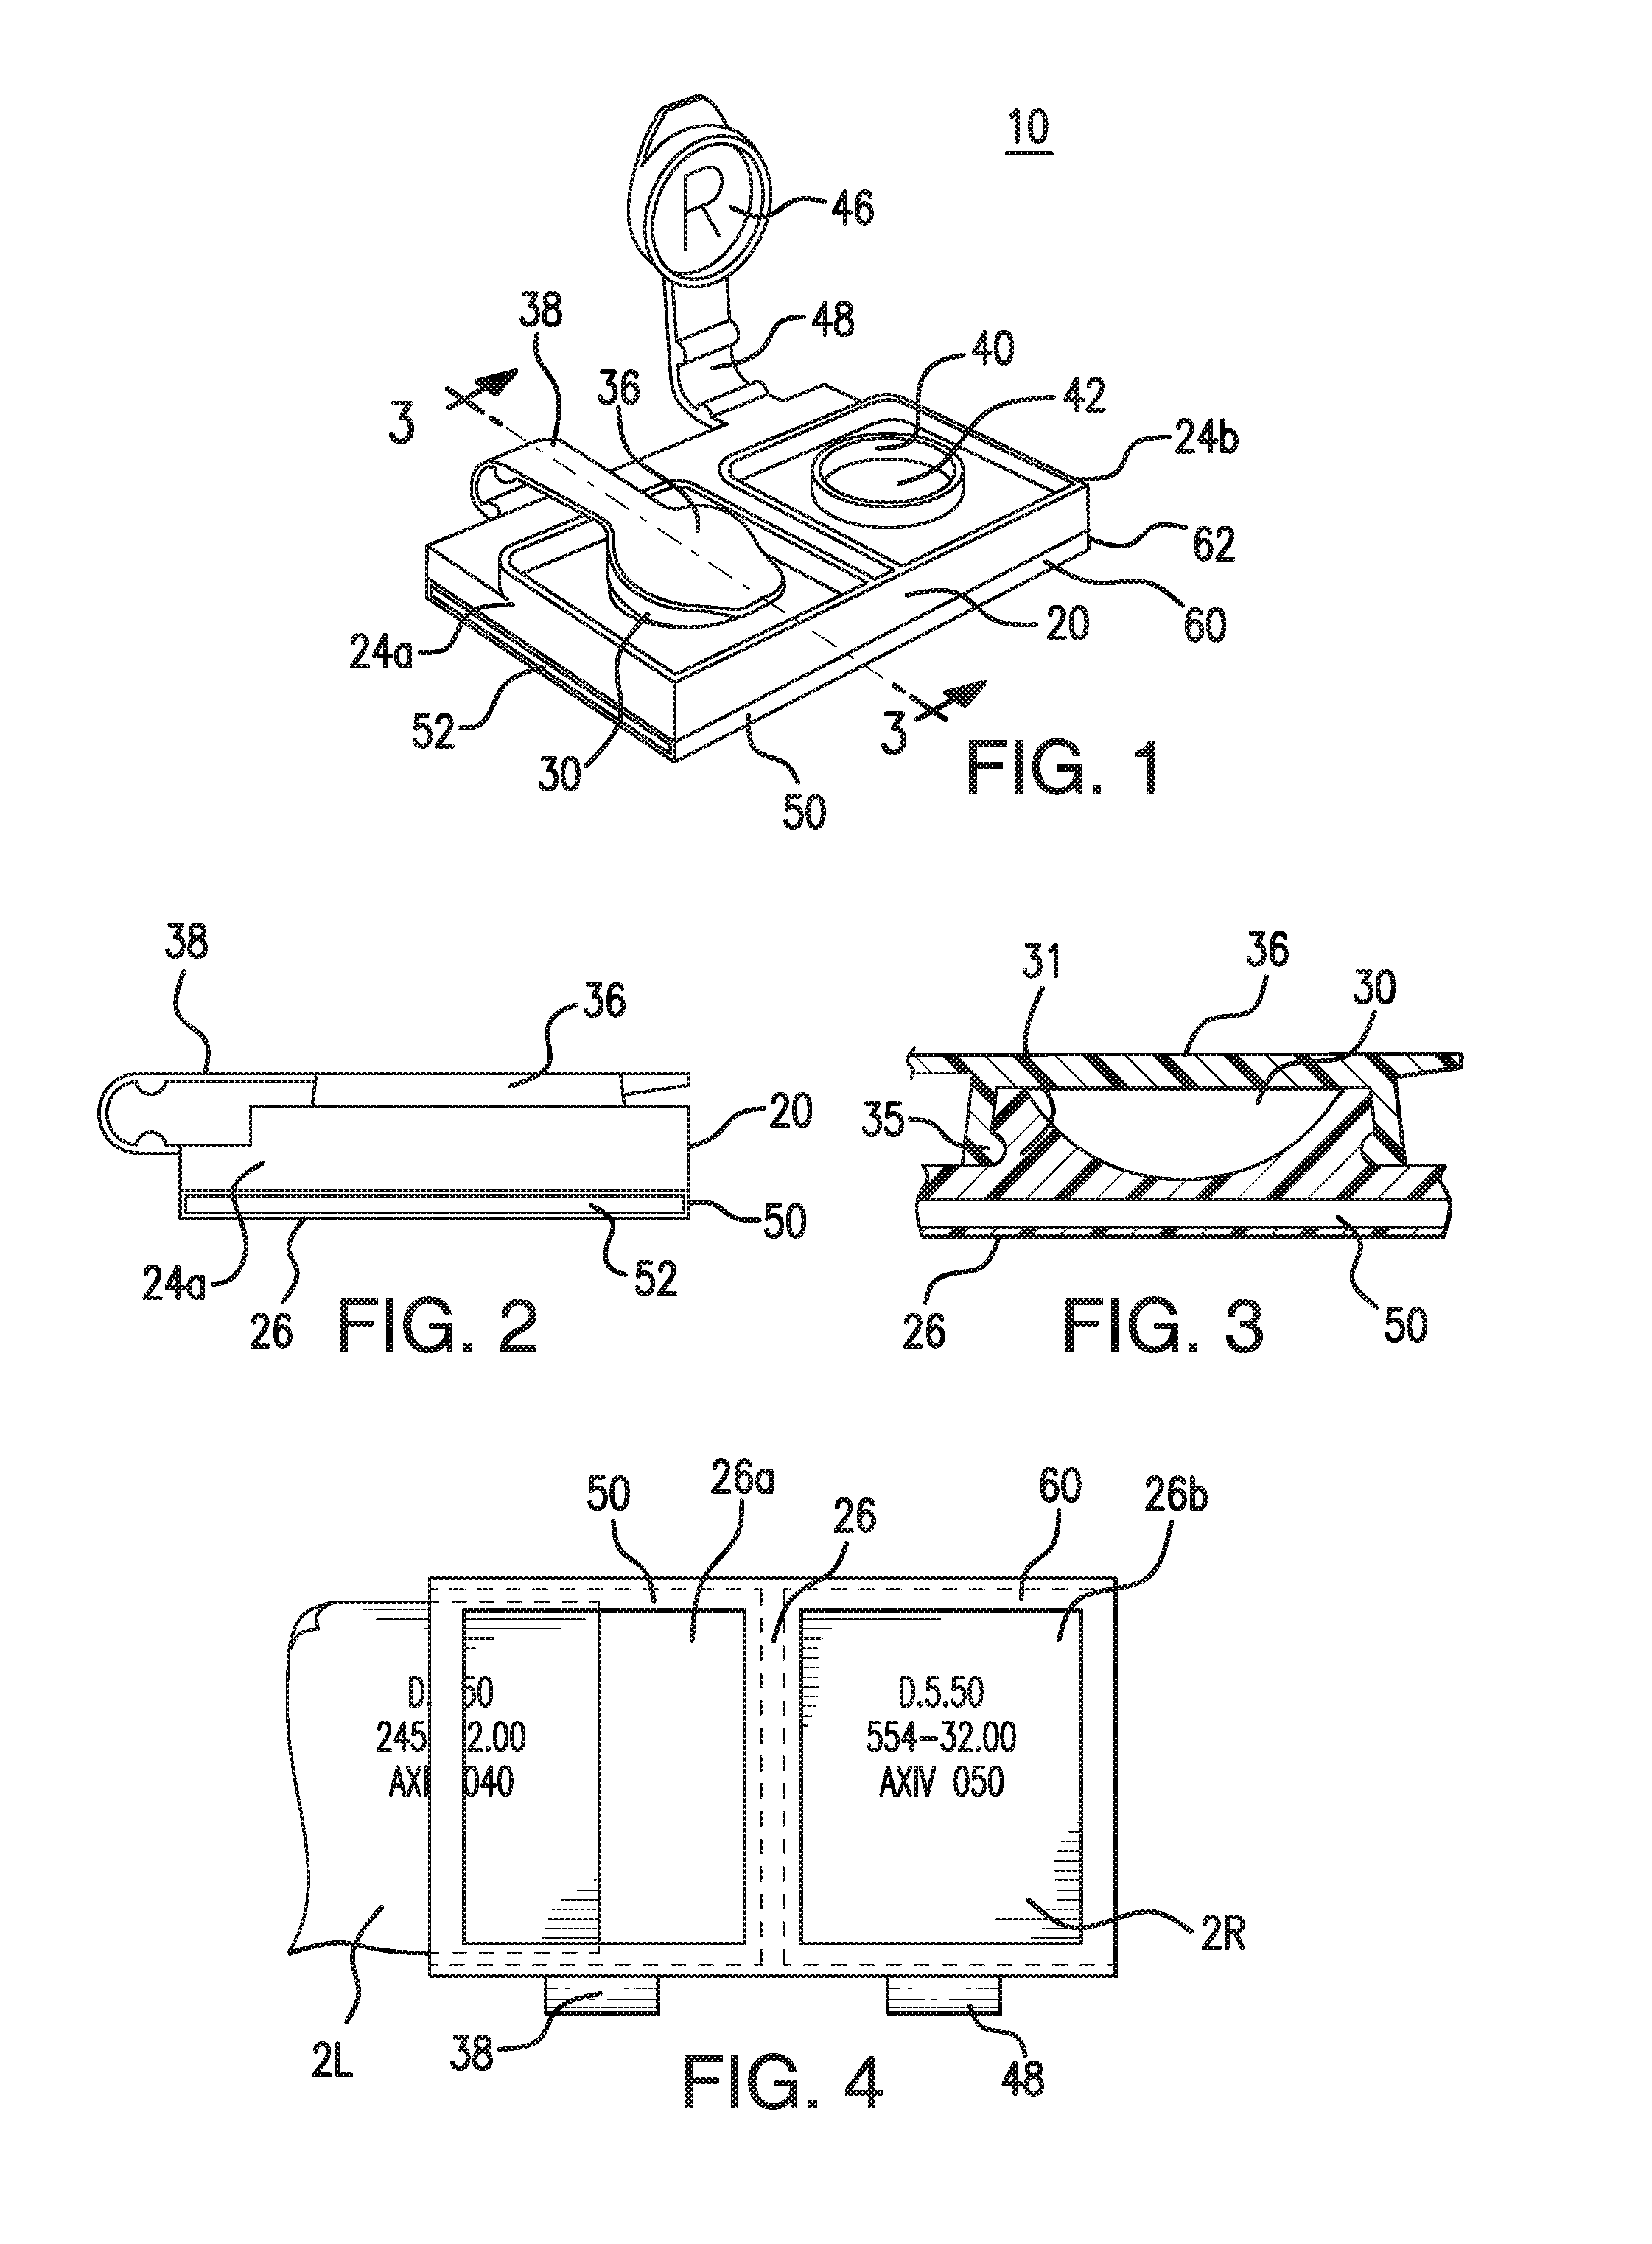 Contact lens case having integrated lens data stowage compartments